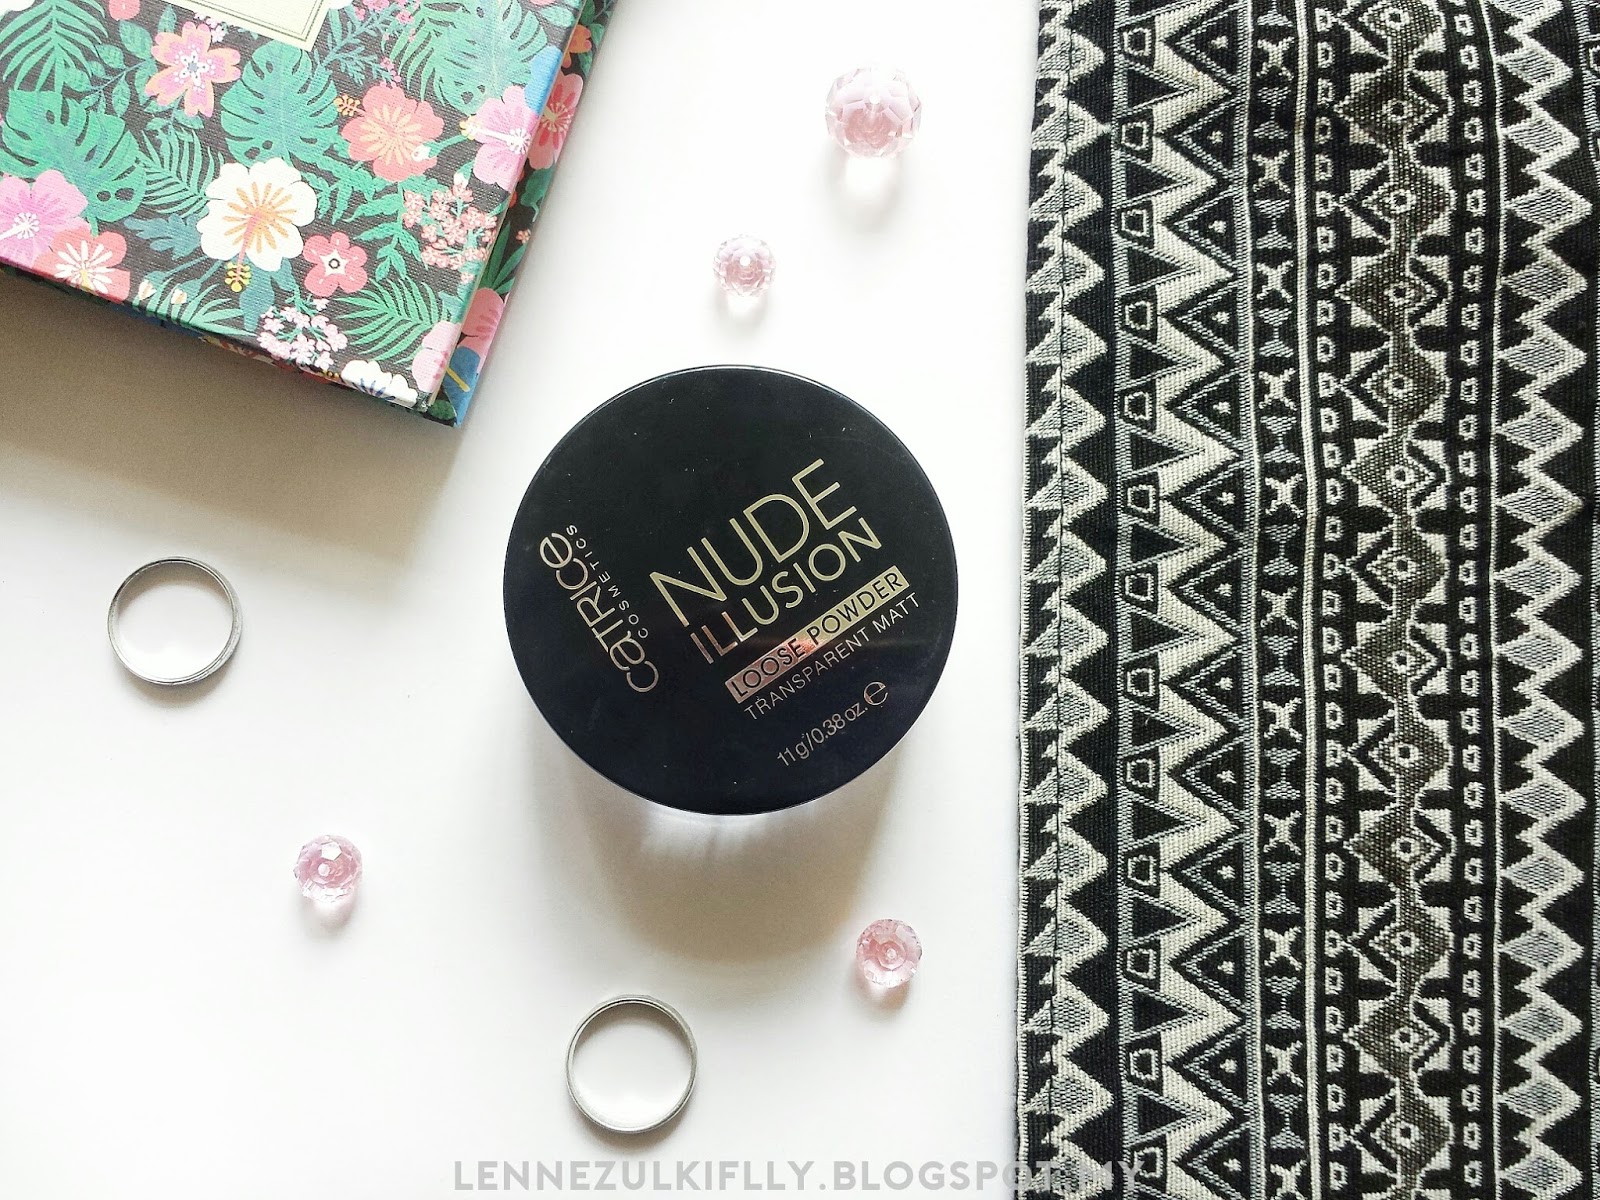 Catrice Nude Illusion Loose Powder | Lenne Zulkiflly